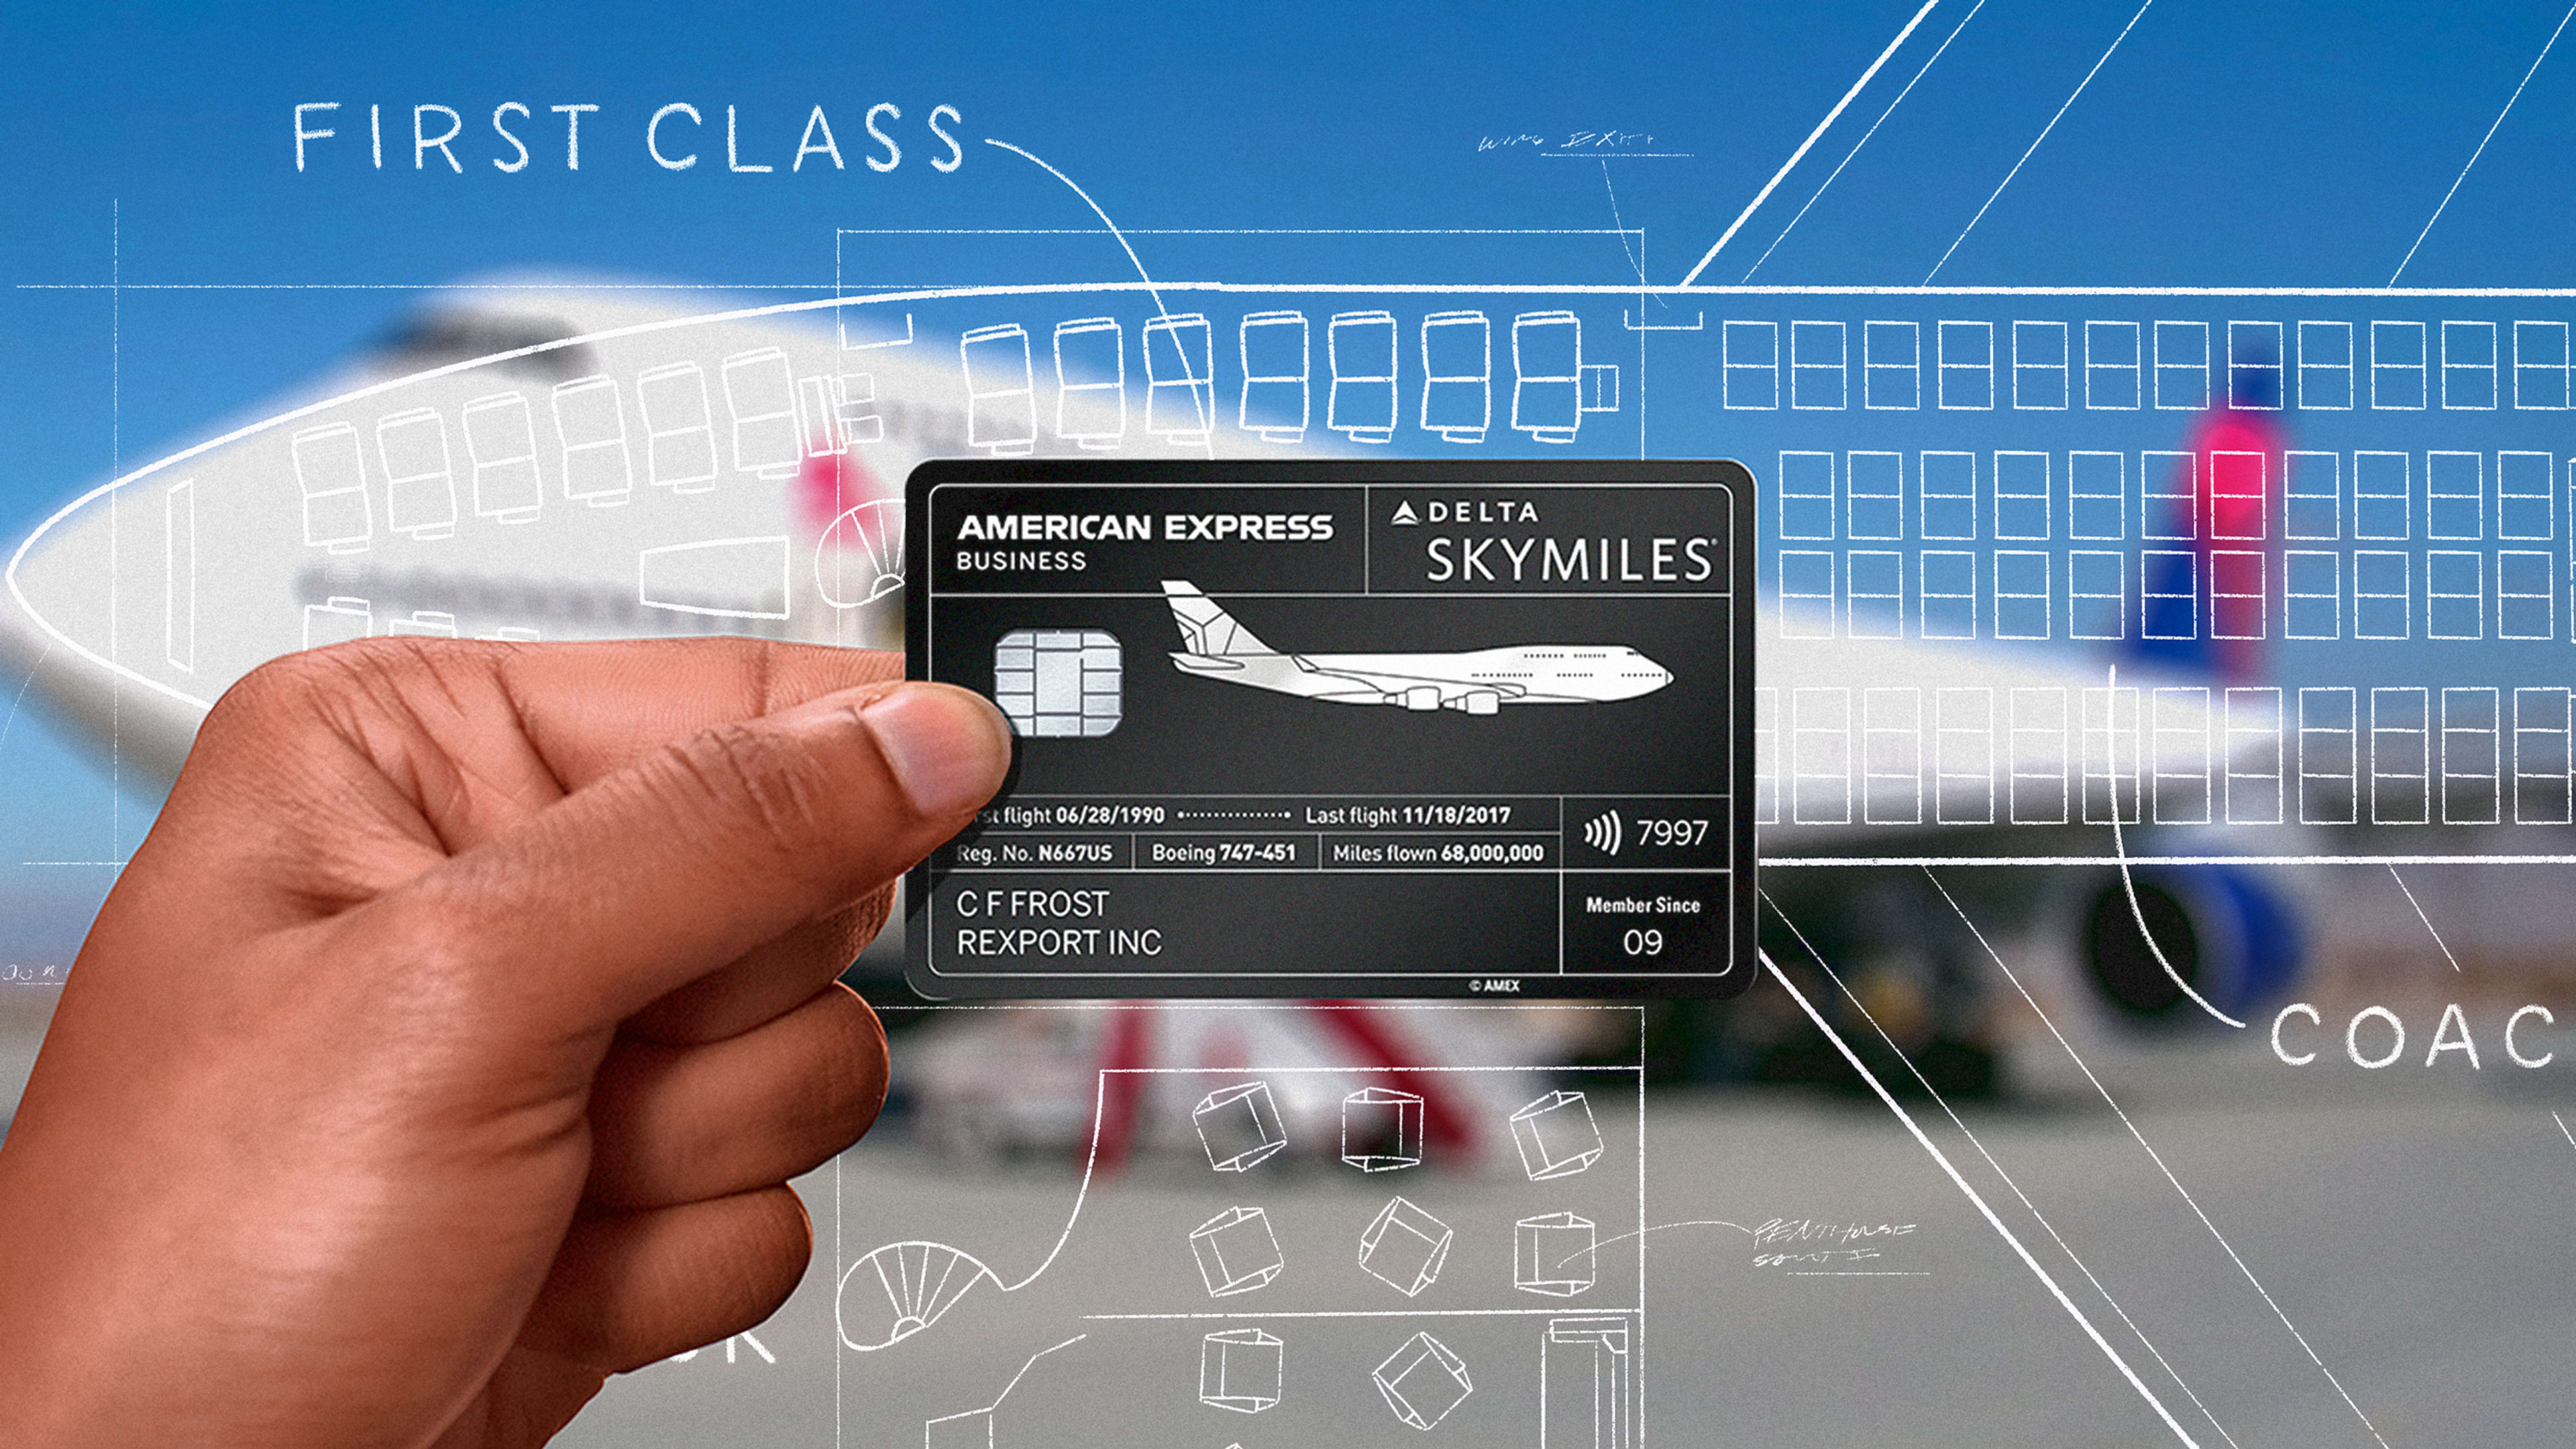 These Amex credit cards were made from a retired Boeing 747